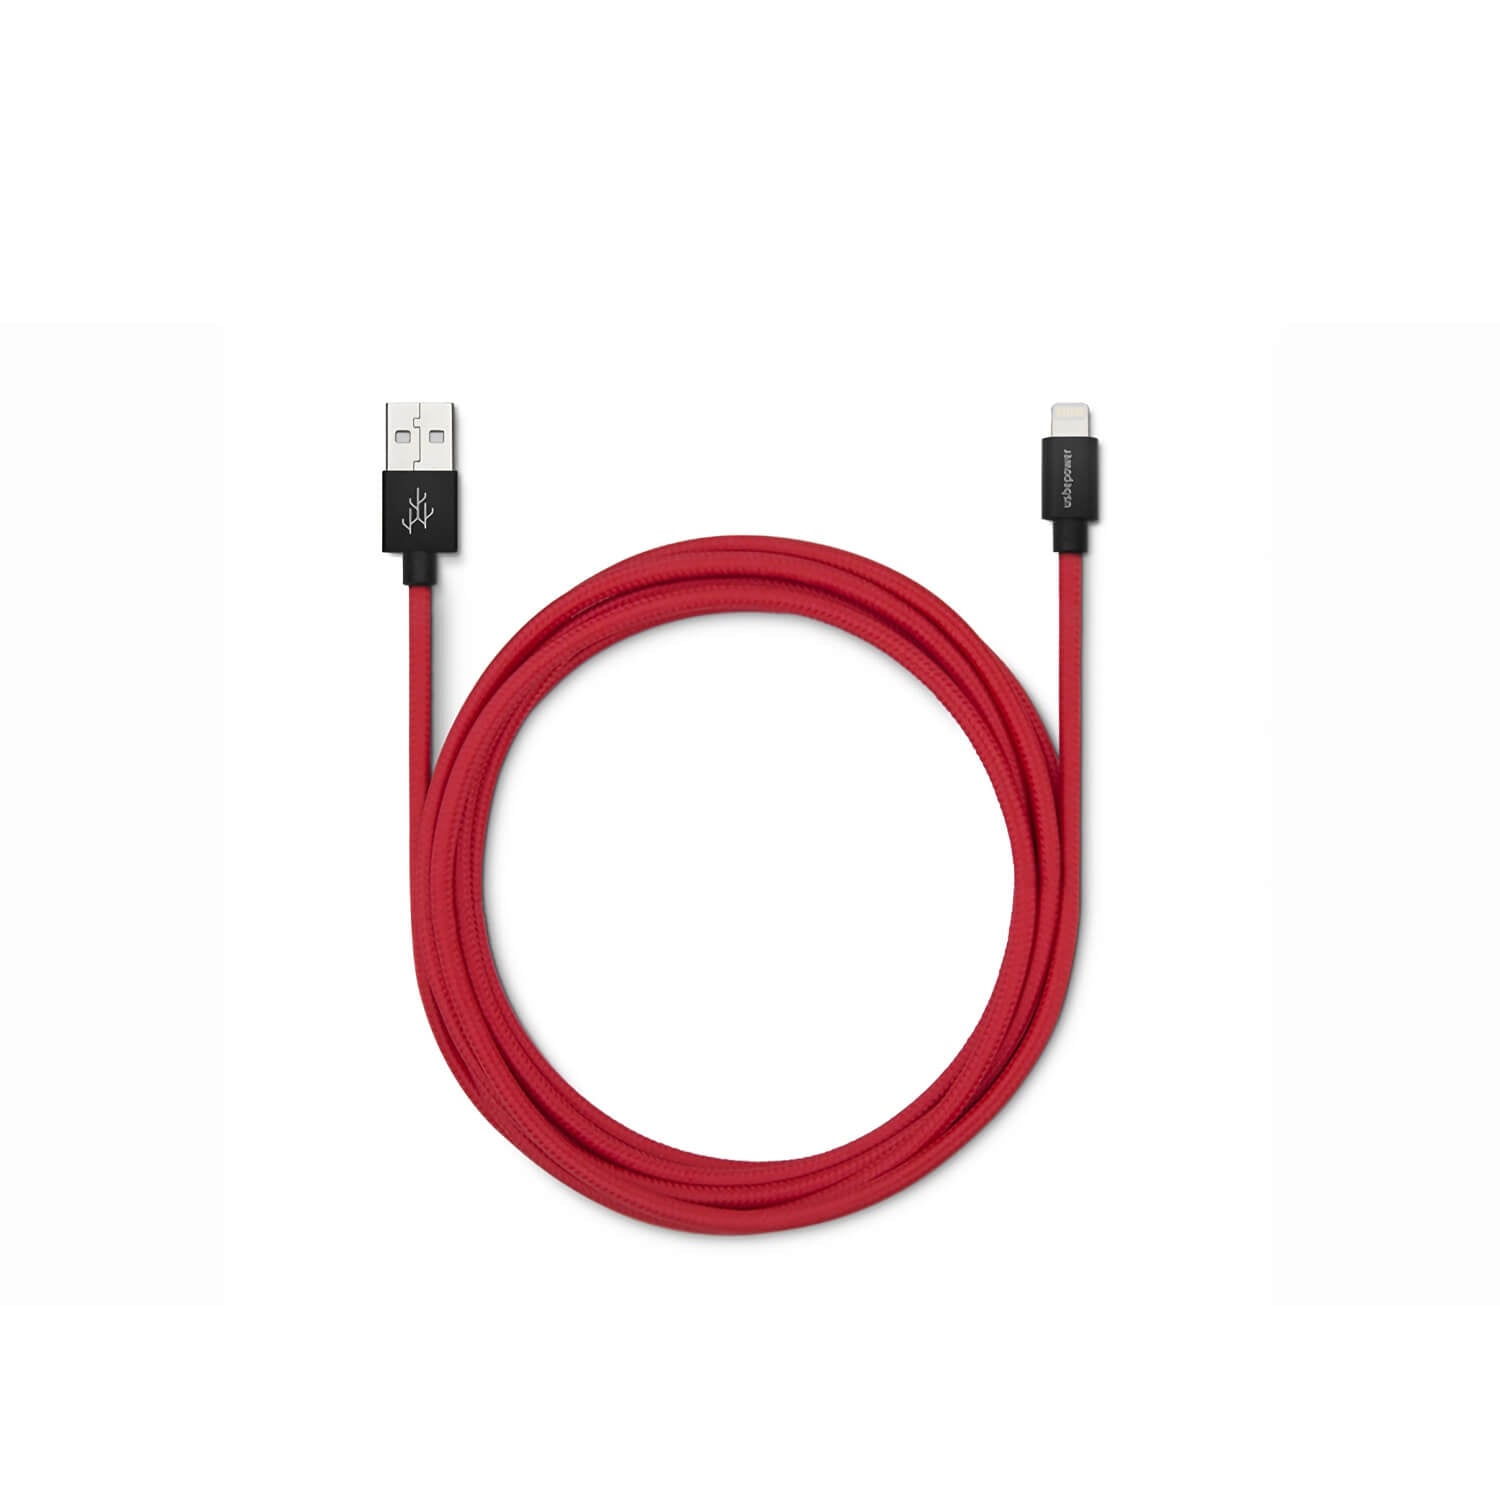 Cosmo Lightning USB Cable  Designed By Design Tech for Usbepower